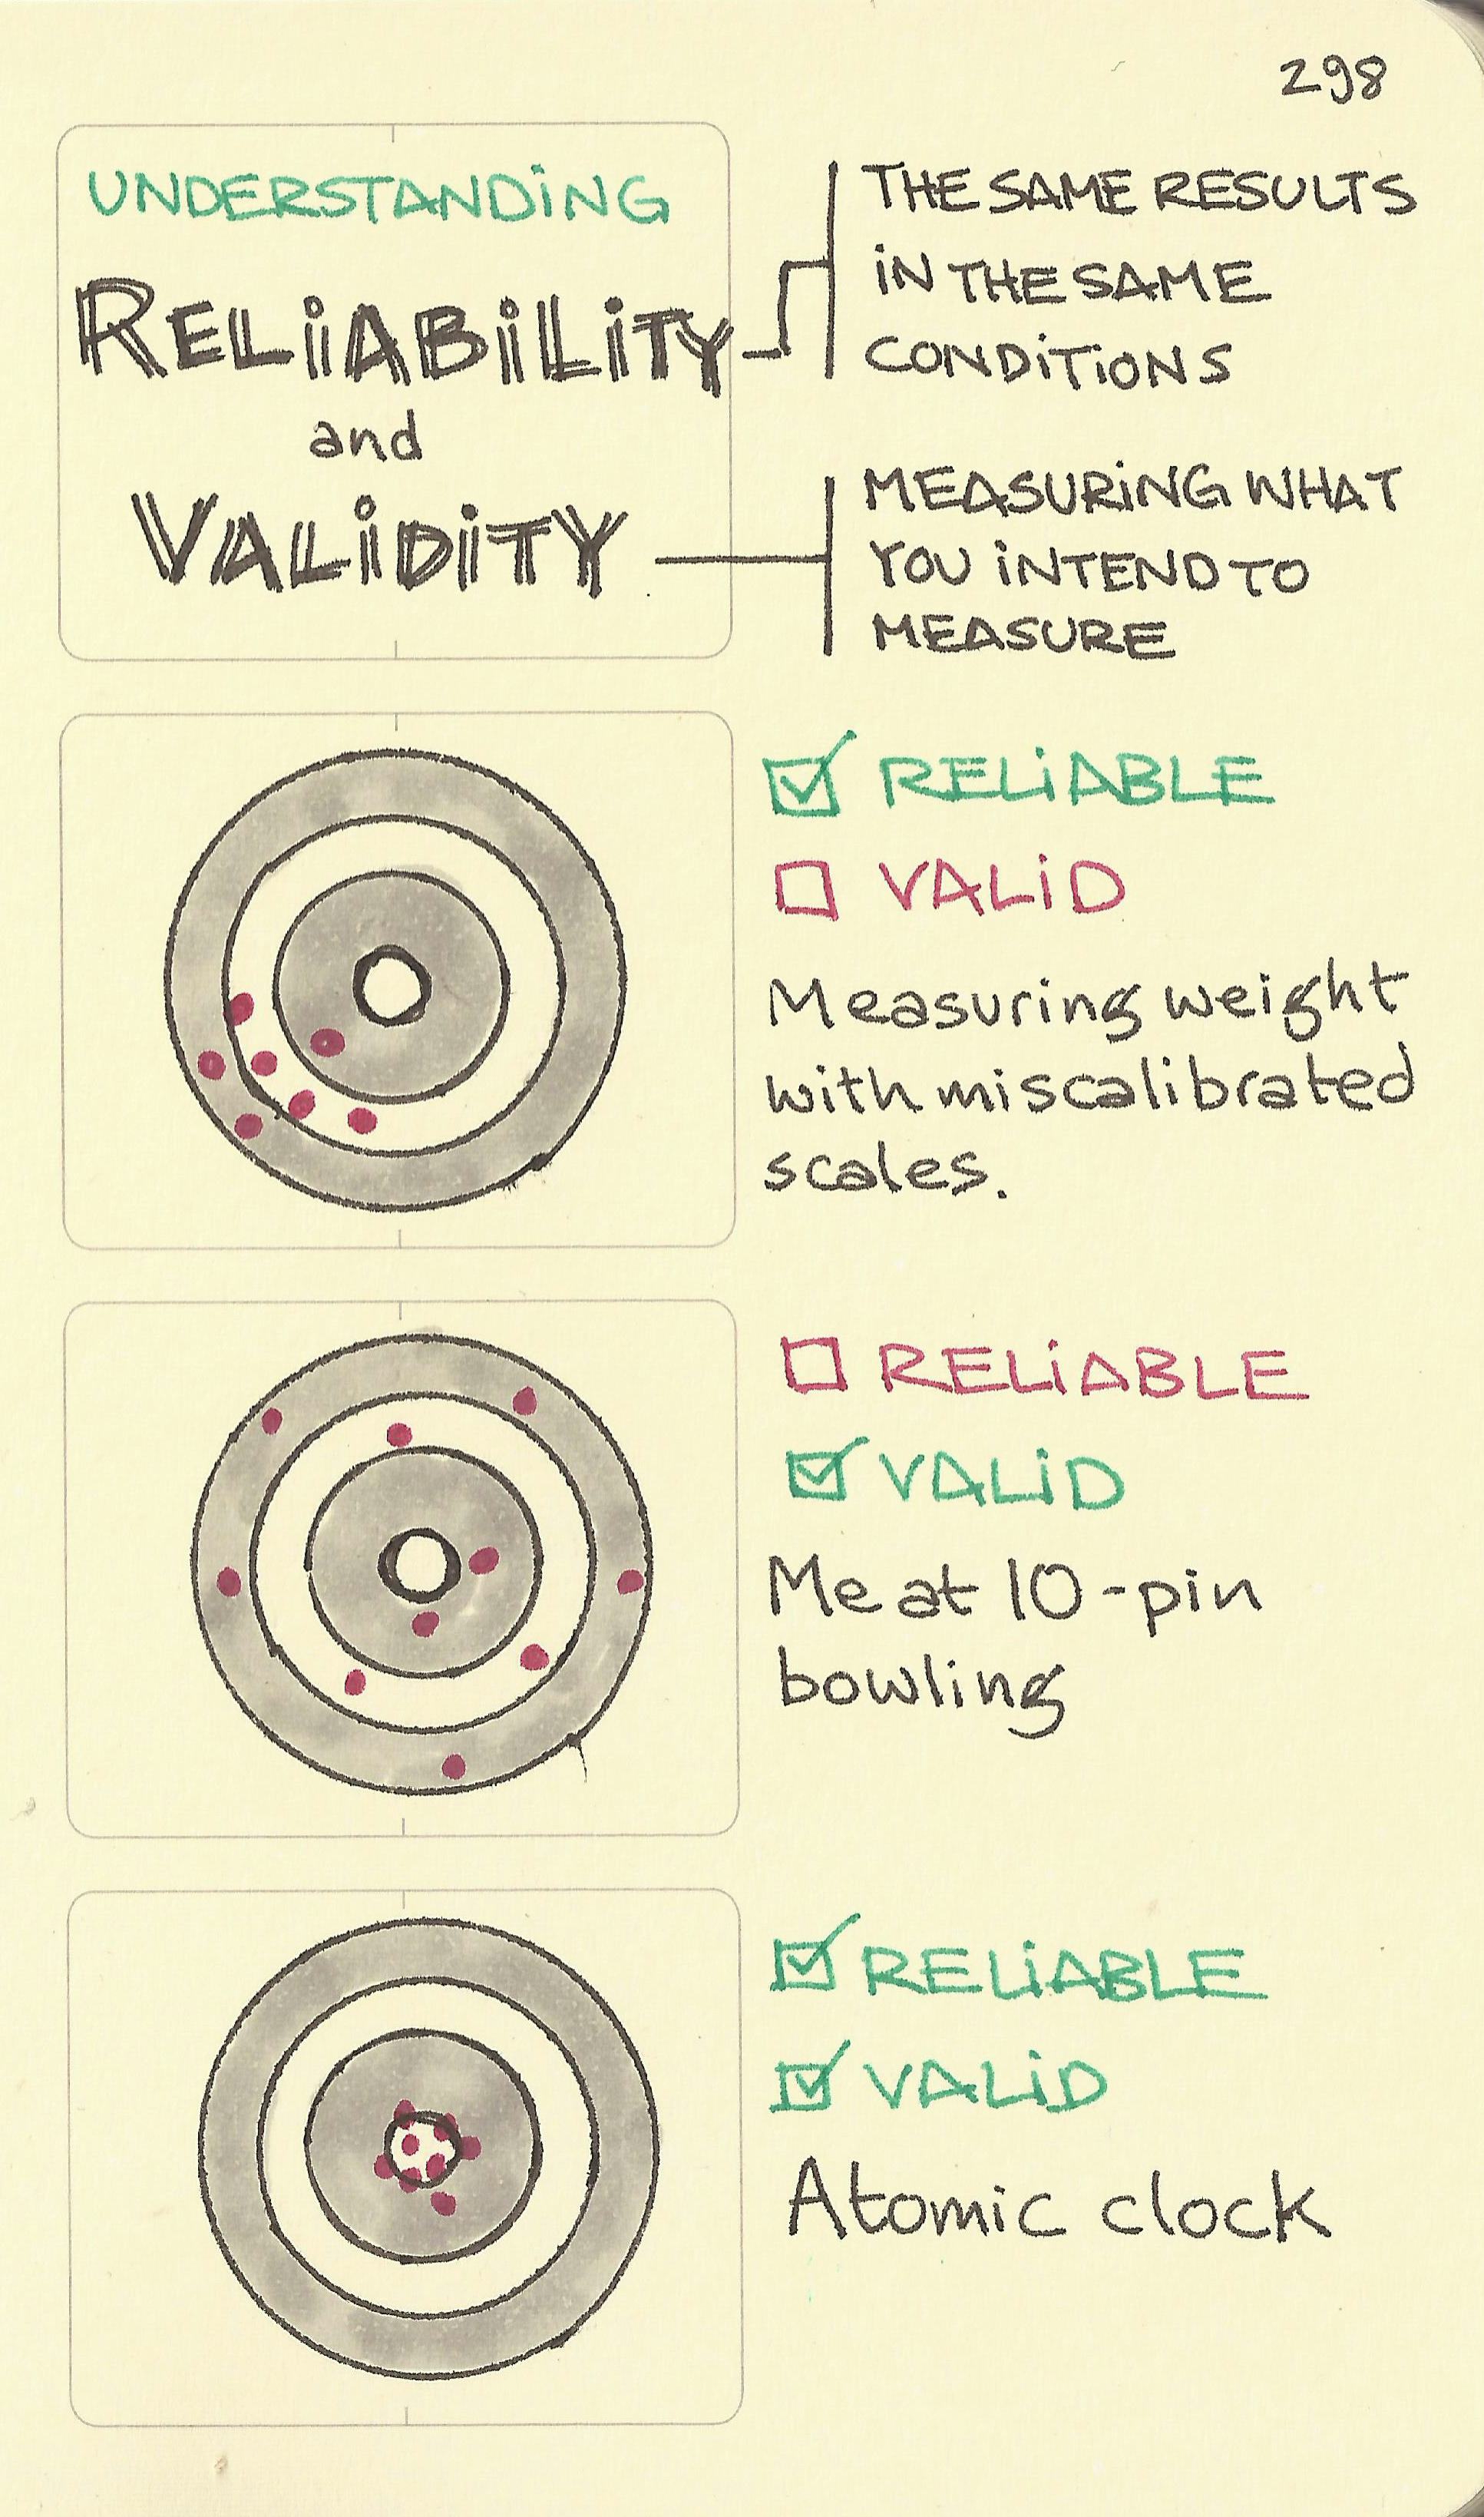 Understanding reliability and validity - Sketchplanations